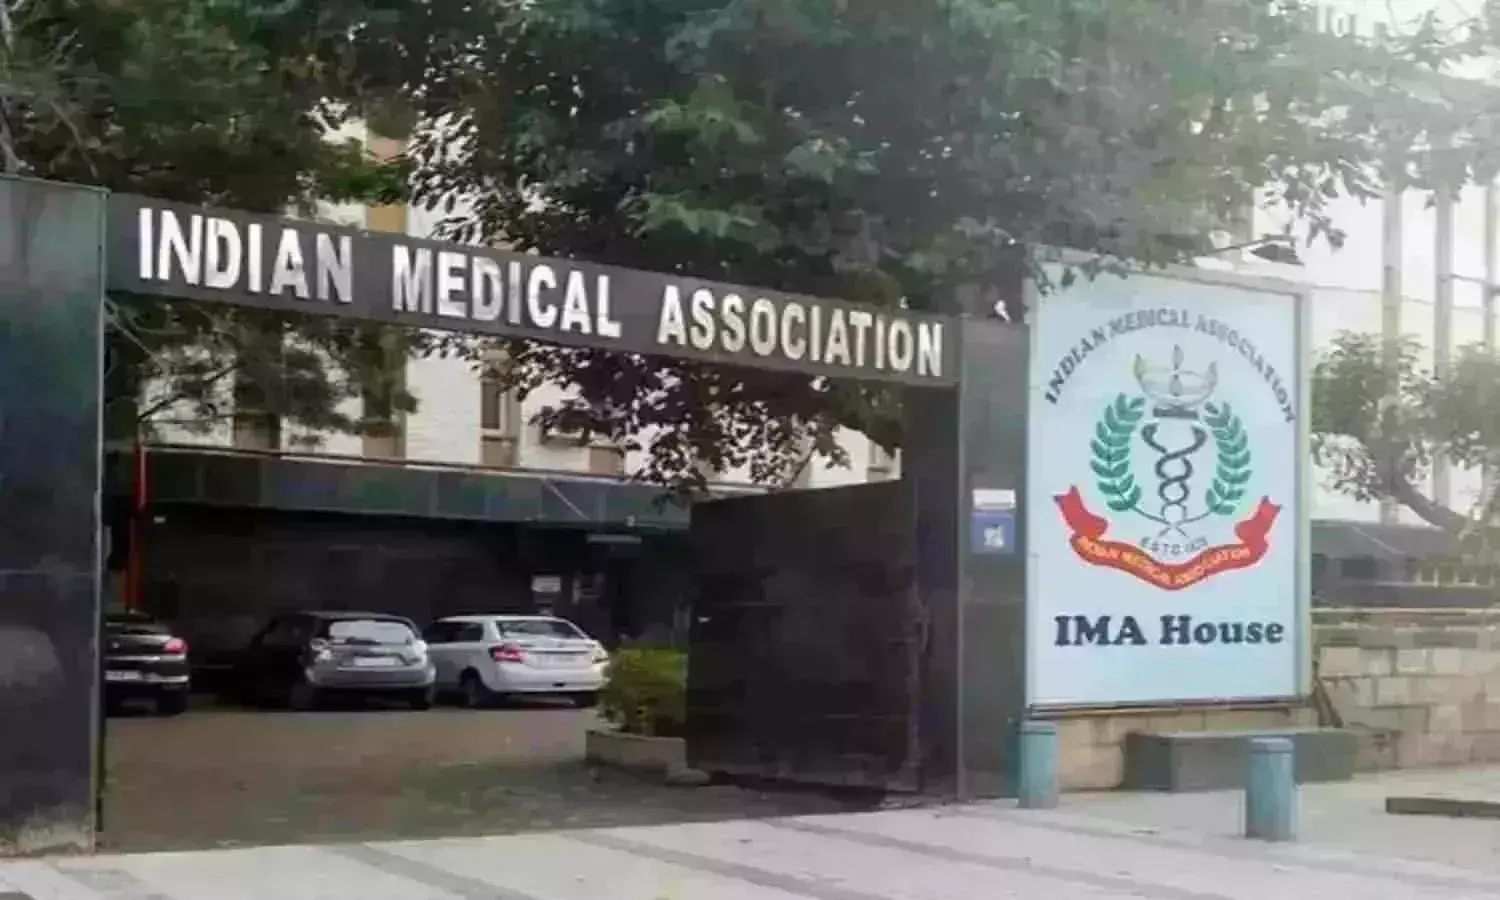 776 doctors succumbed to COVID in second wave, highest in Bihar: IMA